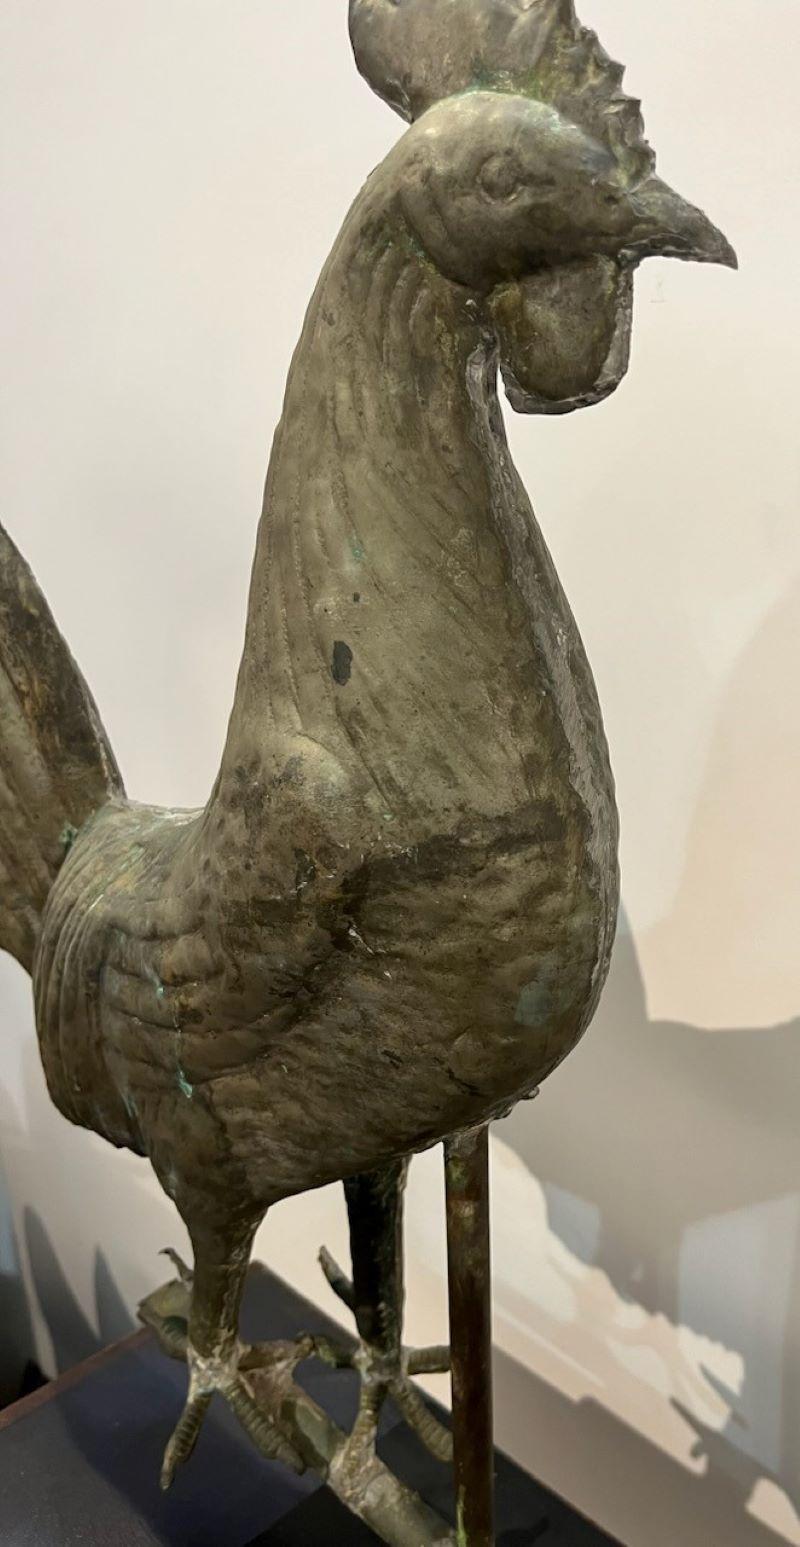 19th century full body rooster weather vane on custom iron base. This rooster has a worn and aged patina of a zinc painted surface. The copper shows through in areas as well.The weight is very good and the solder in the seems shows through. This is